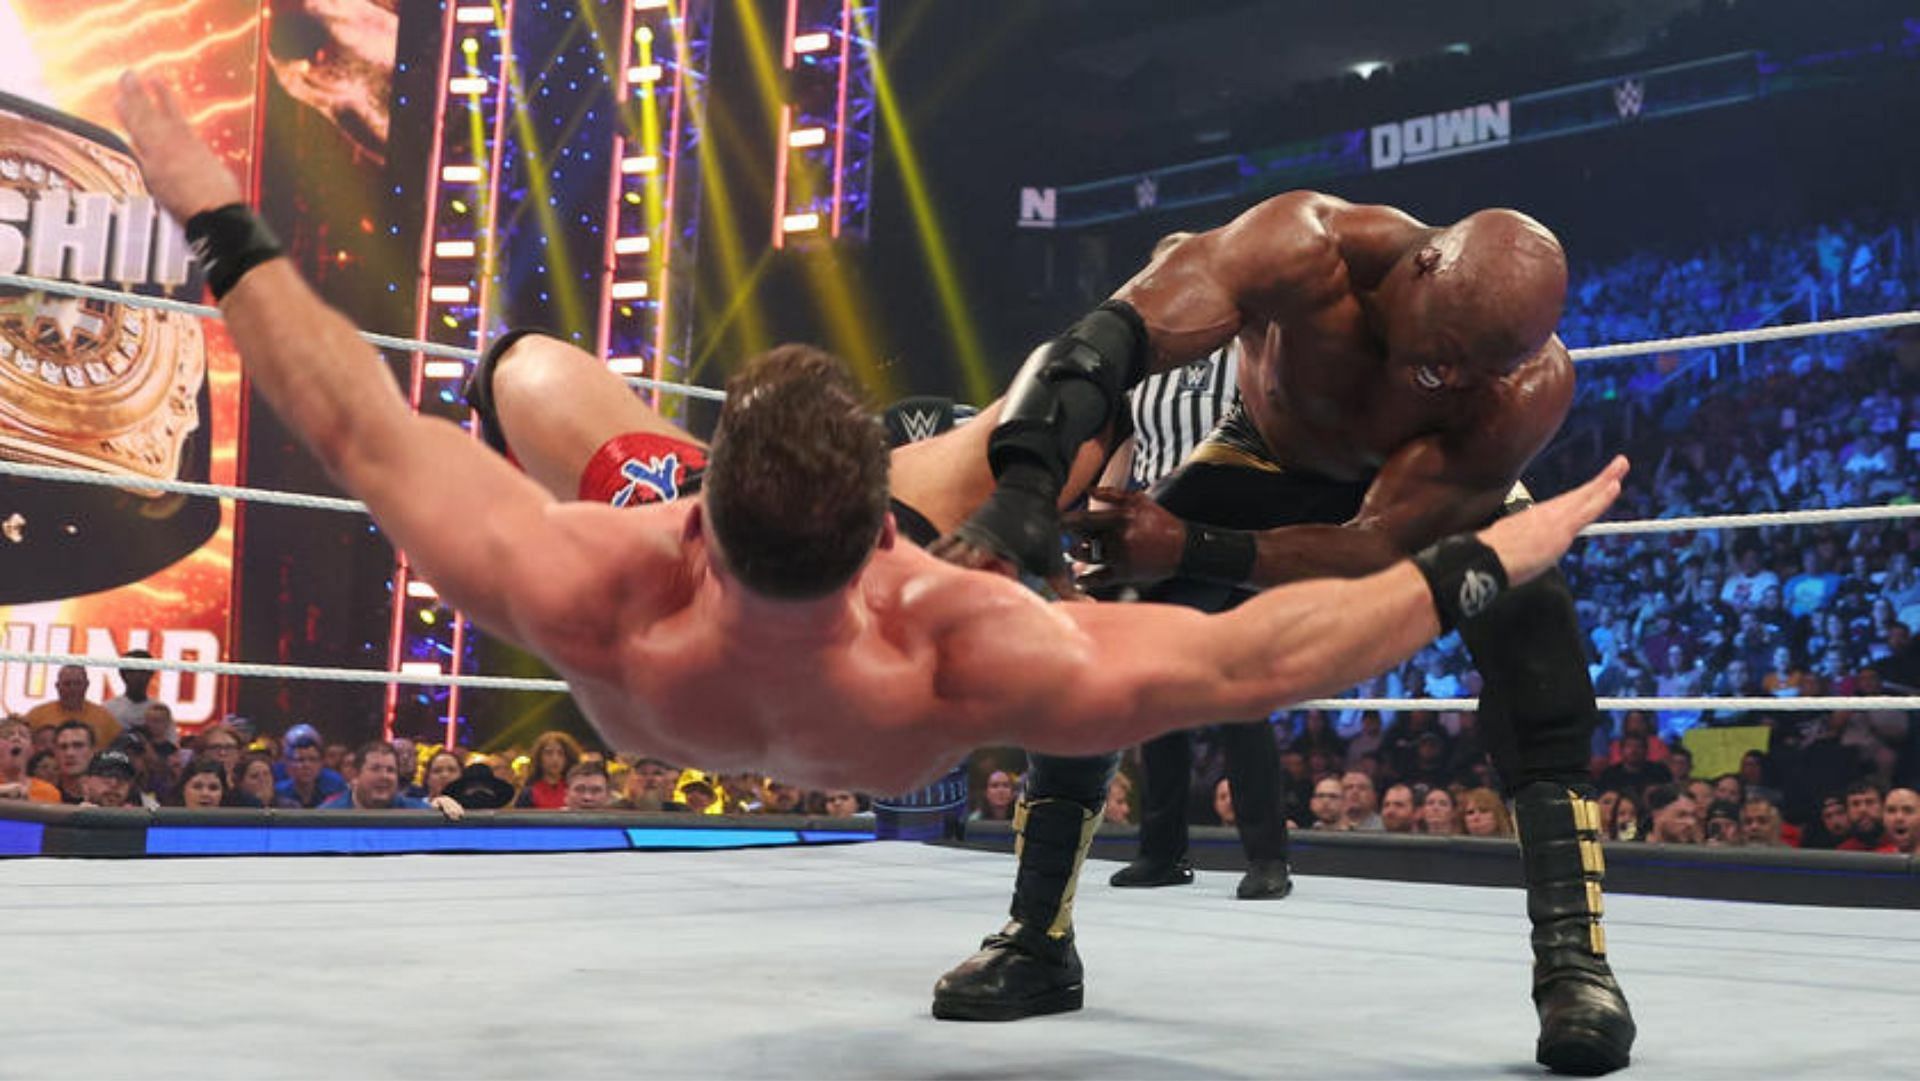 Bobby Lashley went up against Austin Theory and Sheamus on SmackDown